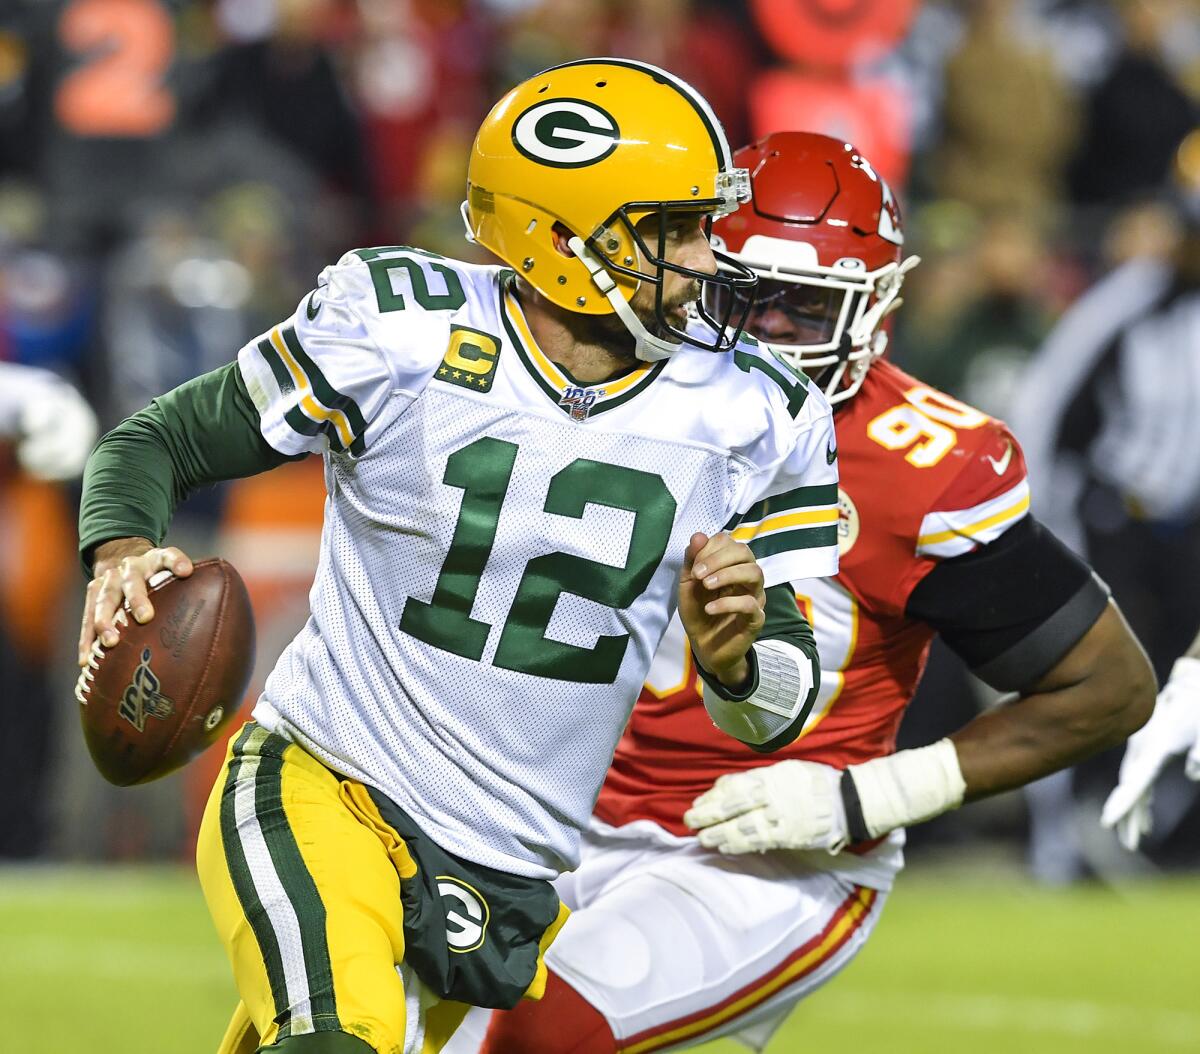 Green Bay Packers quarterback Aaron Rodgers (12) is chased out of the pocket in the second quarter by Kansas City Chiefs defensive end Emmanuel Ogbah in Kansas City, Mo., on Oct. 27, 2019.